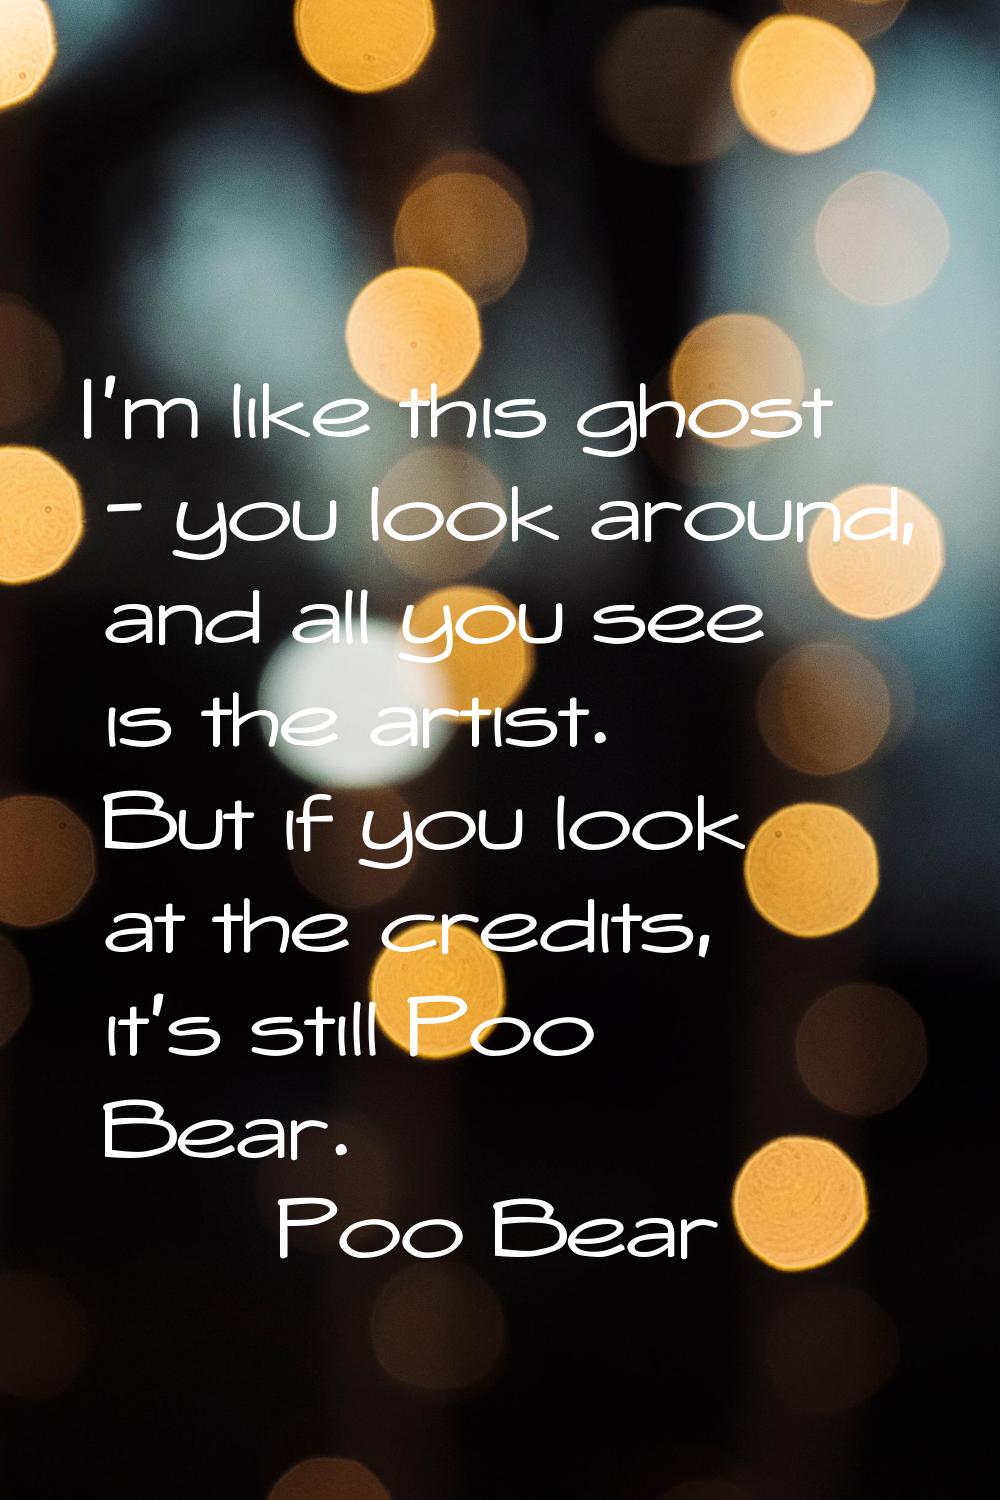 I'm like this ghost - you look around, and all you see is the artist. But if you look at the credit